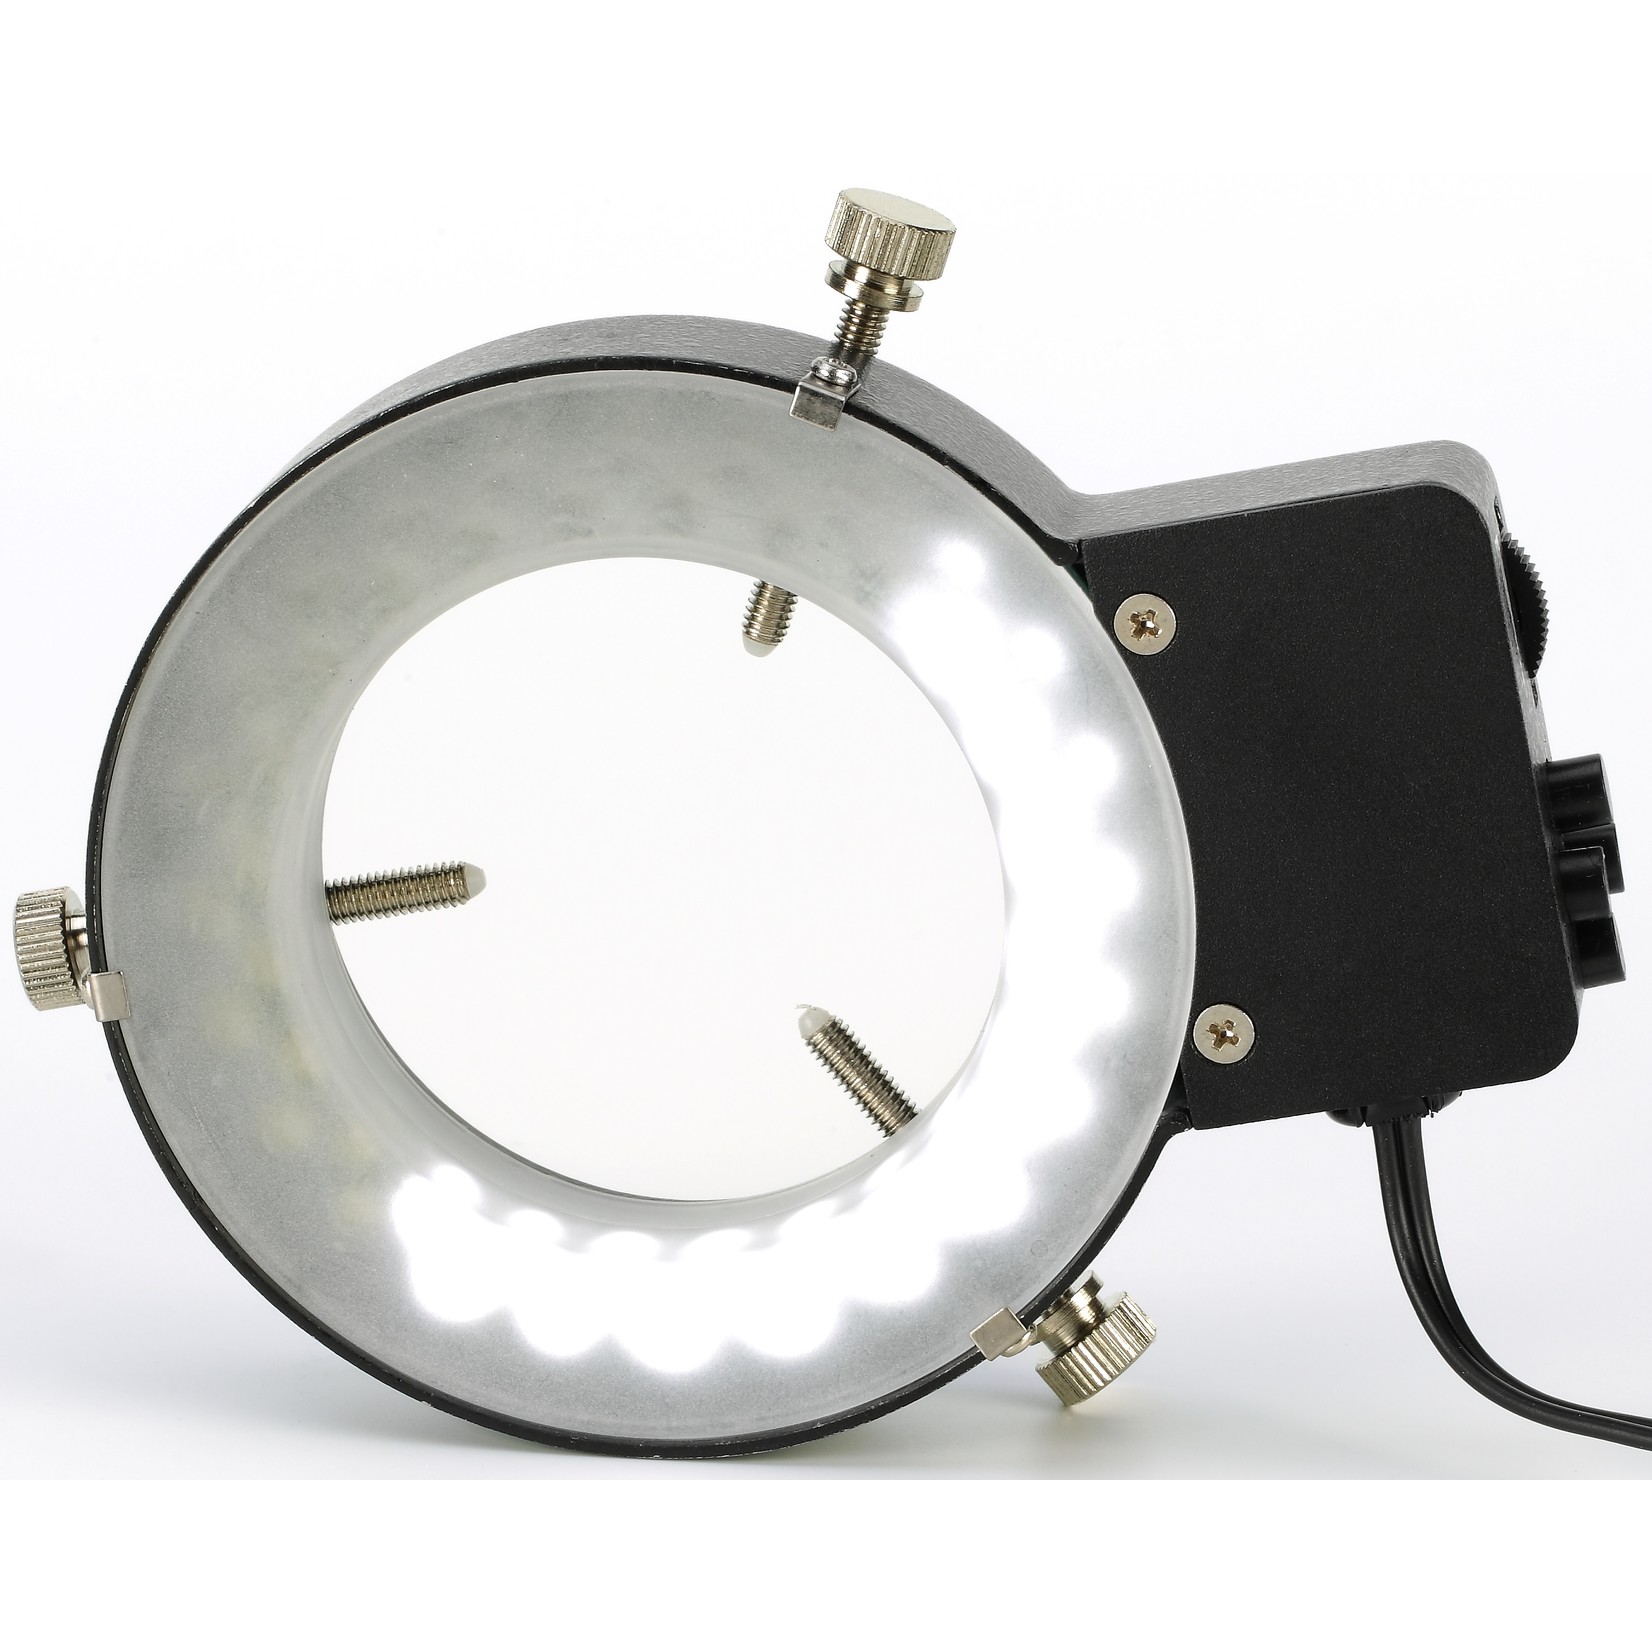 LED ring light with 144 LEDs, diffuser, dimming and segment switching